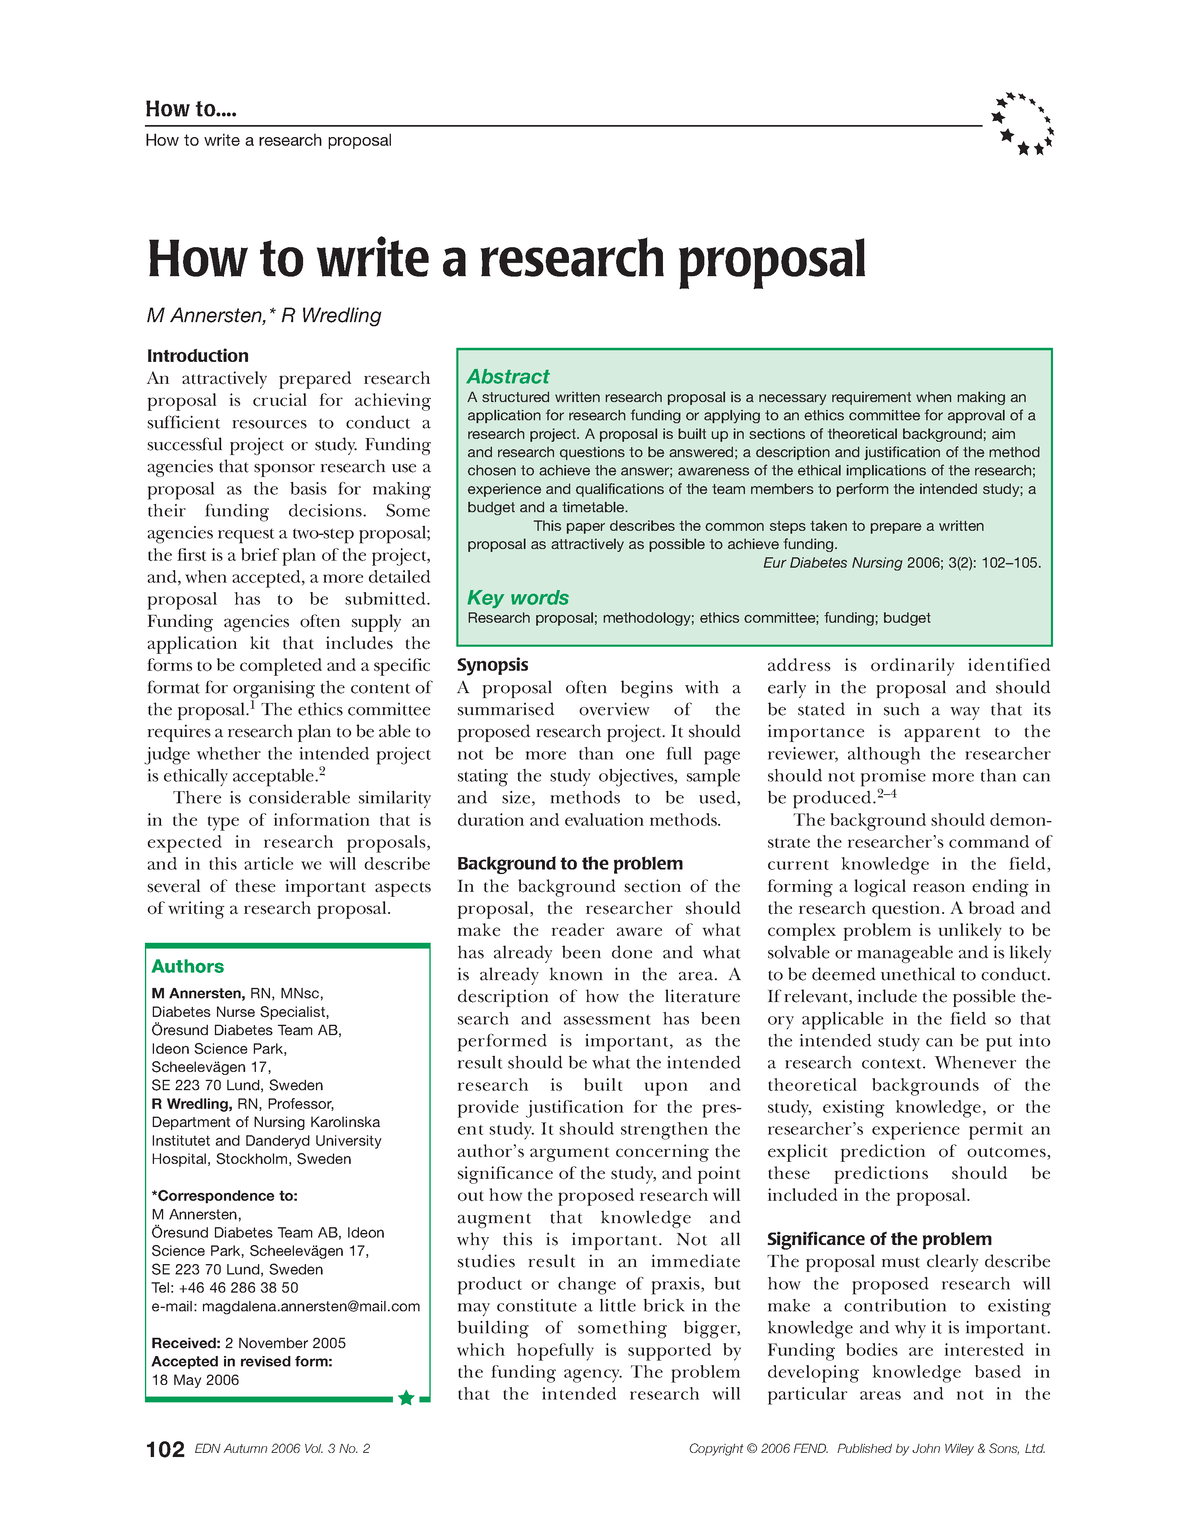 how to write a research proposal by annersten